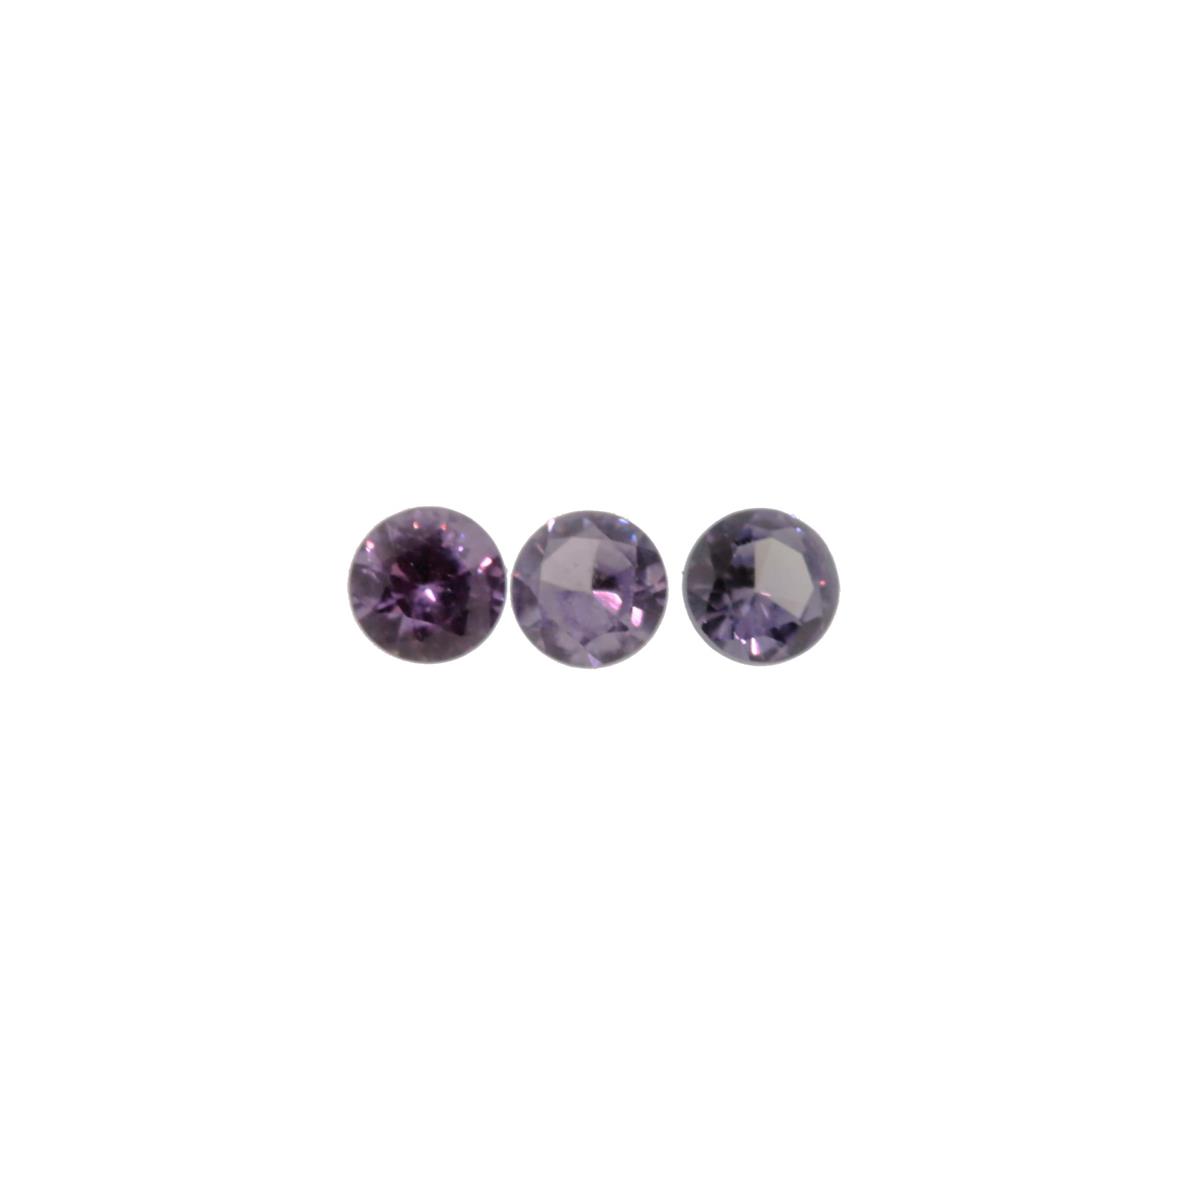 Modal Additional Images for Synthetic Alexandrite 3.5mm